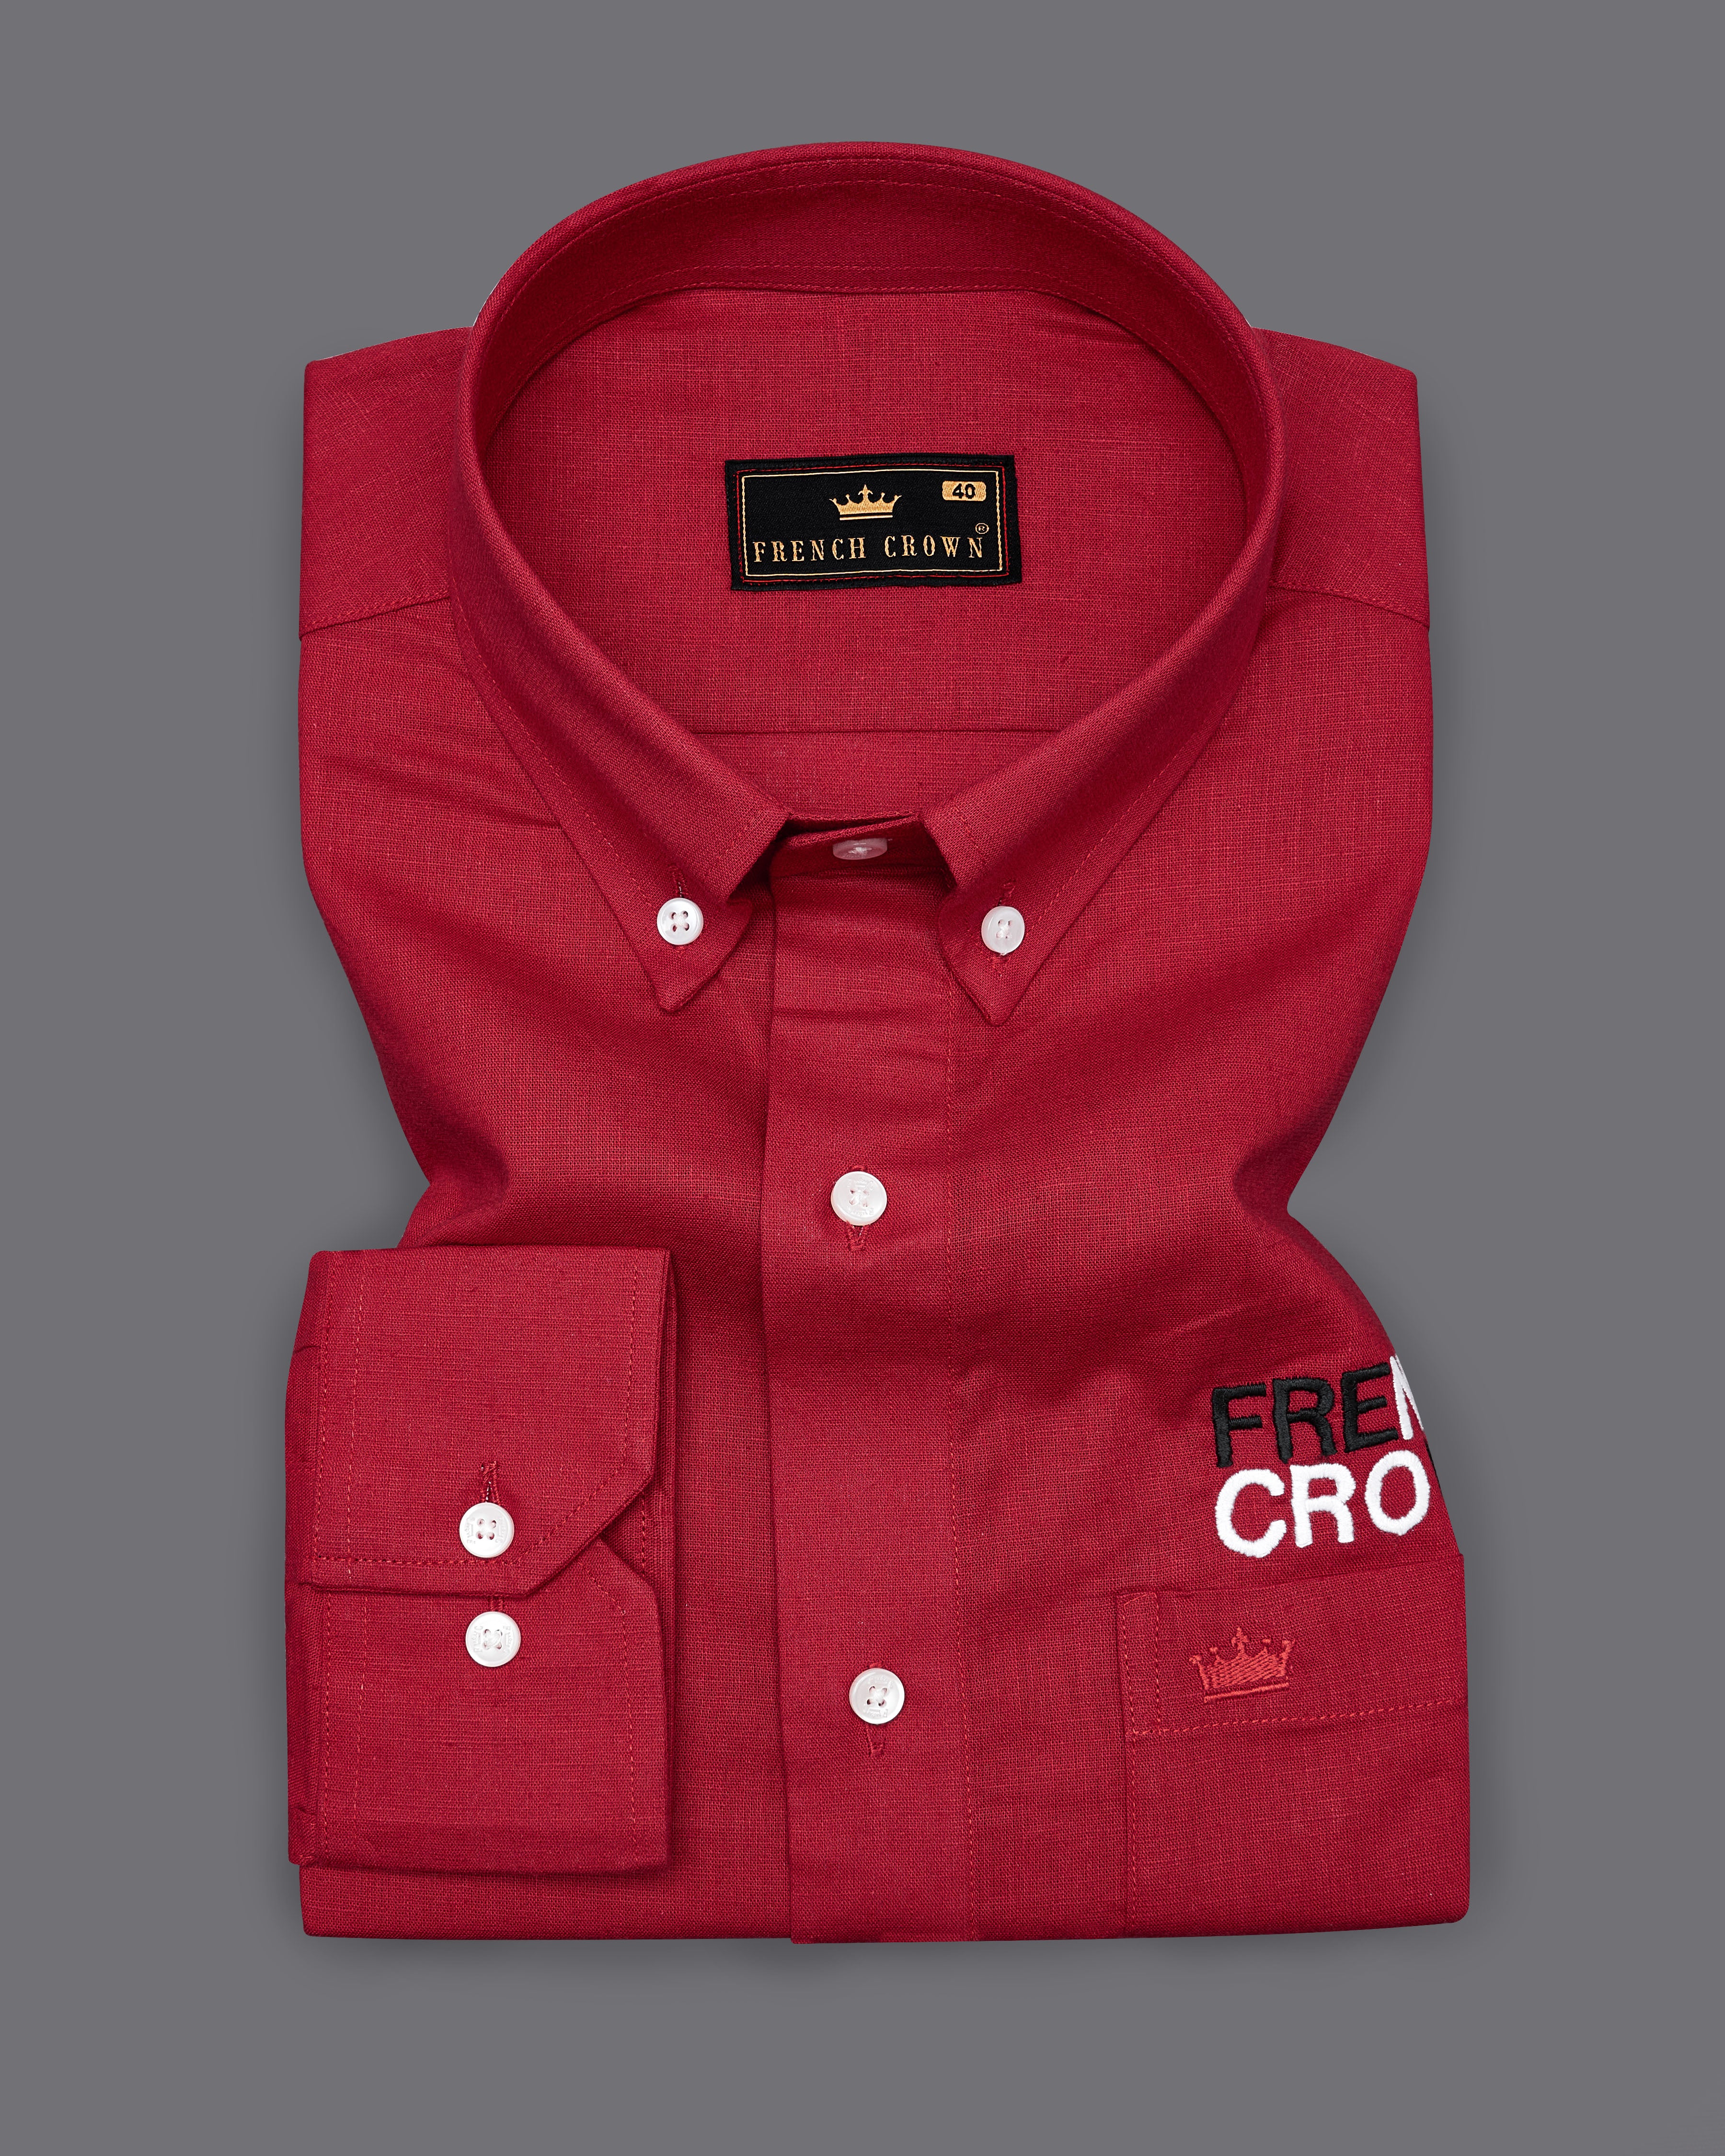 Cornell Red with Black and White Luxurious Linen  Embroidered Signature Shirt 5985-BD-E039-38, 5985-BD-E039-H-38, 5985-BD-E039-39, 5985-BD-E039-H-39, 5985-BD-E039-40, 5985-BD-E039-H-40, 5985-BD-E039-42, 5985-BD-E039-H-42, 5985-BD-E039-44, 5985-BD-E039-H-44, 5985-BD-E039-46, 5985-BD-E039-H-46, 5985-BD-E039-48, 5985-BD-E039-H-48, 5985-BD-E039-50, 5985-BD-E039-H-50, 5985-BD-E039-52, 5985-BD-E039-H-52